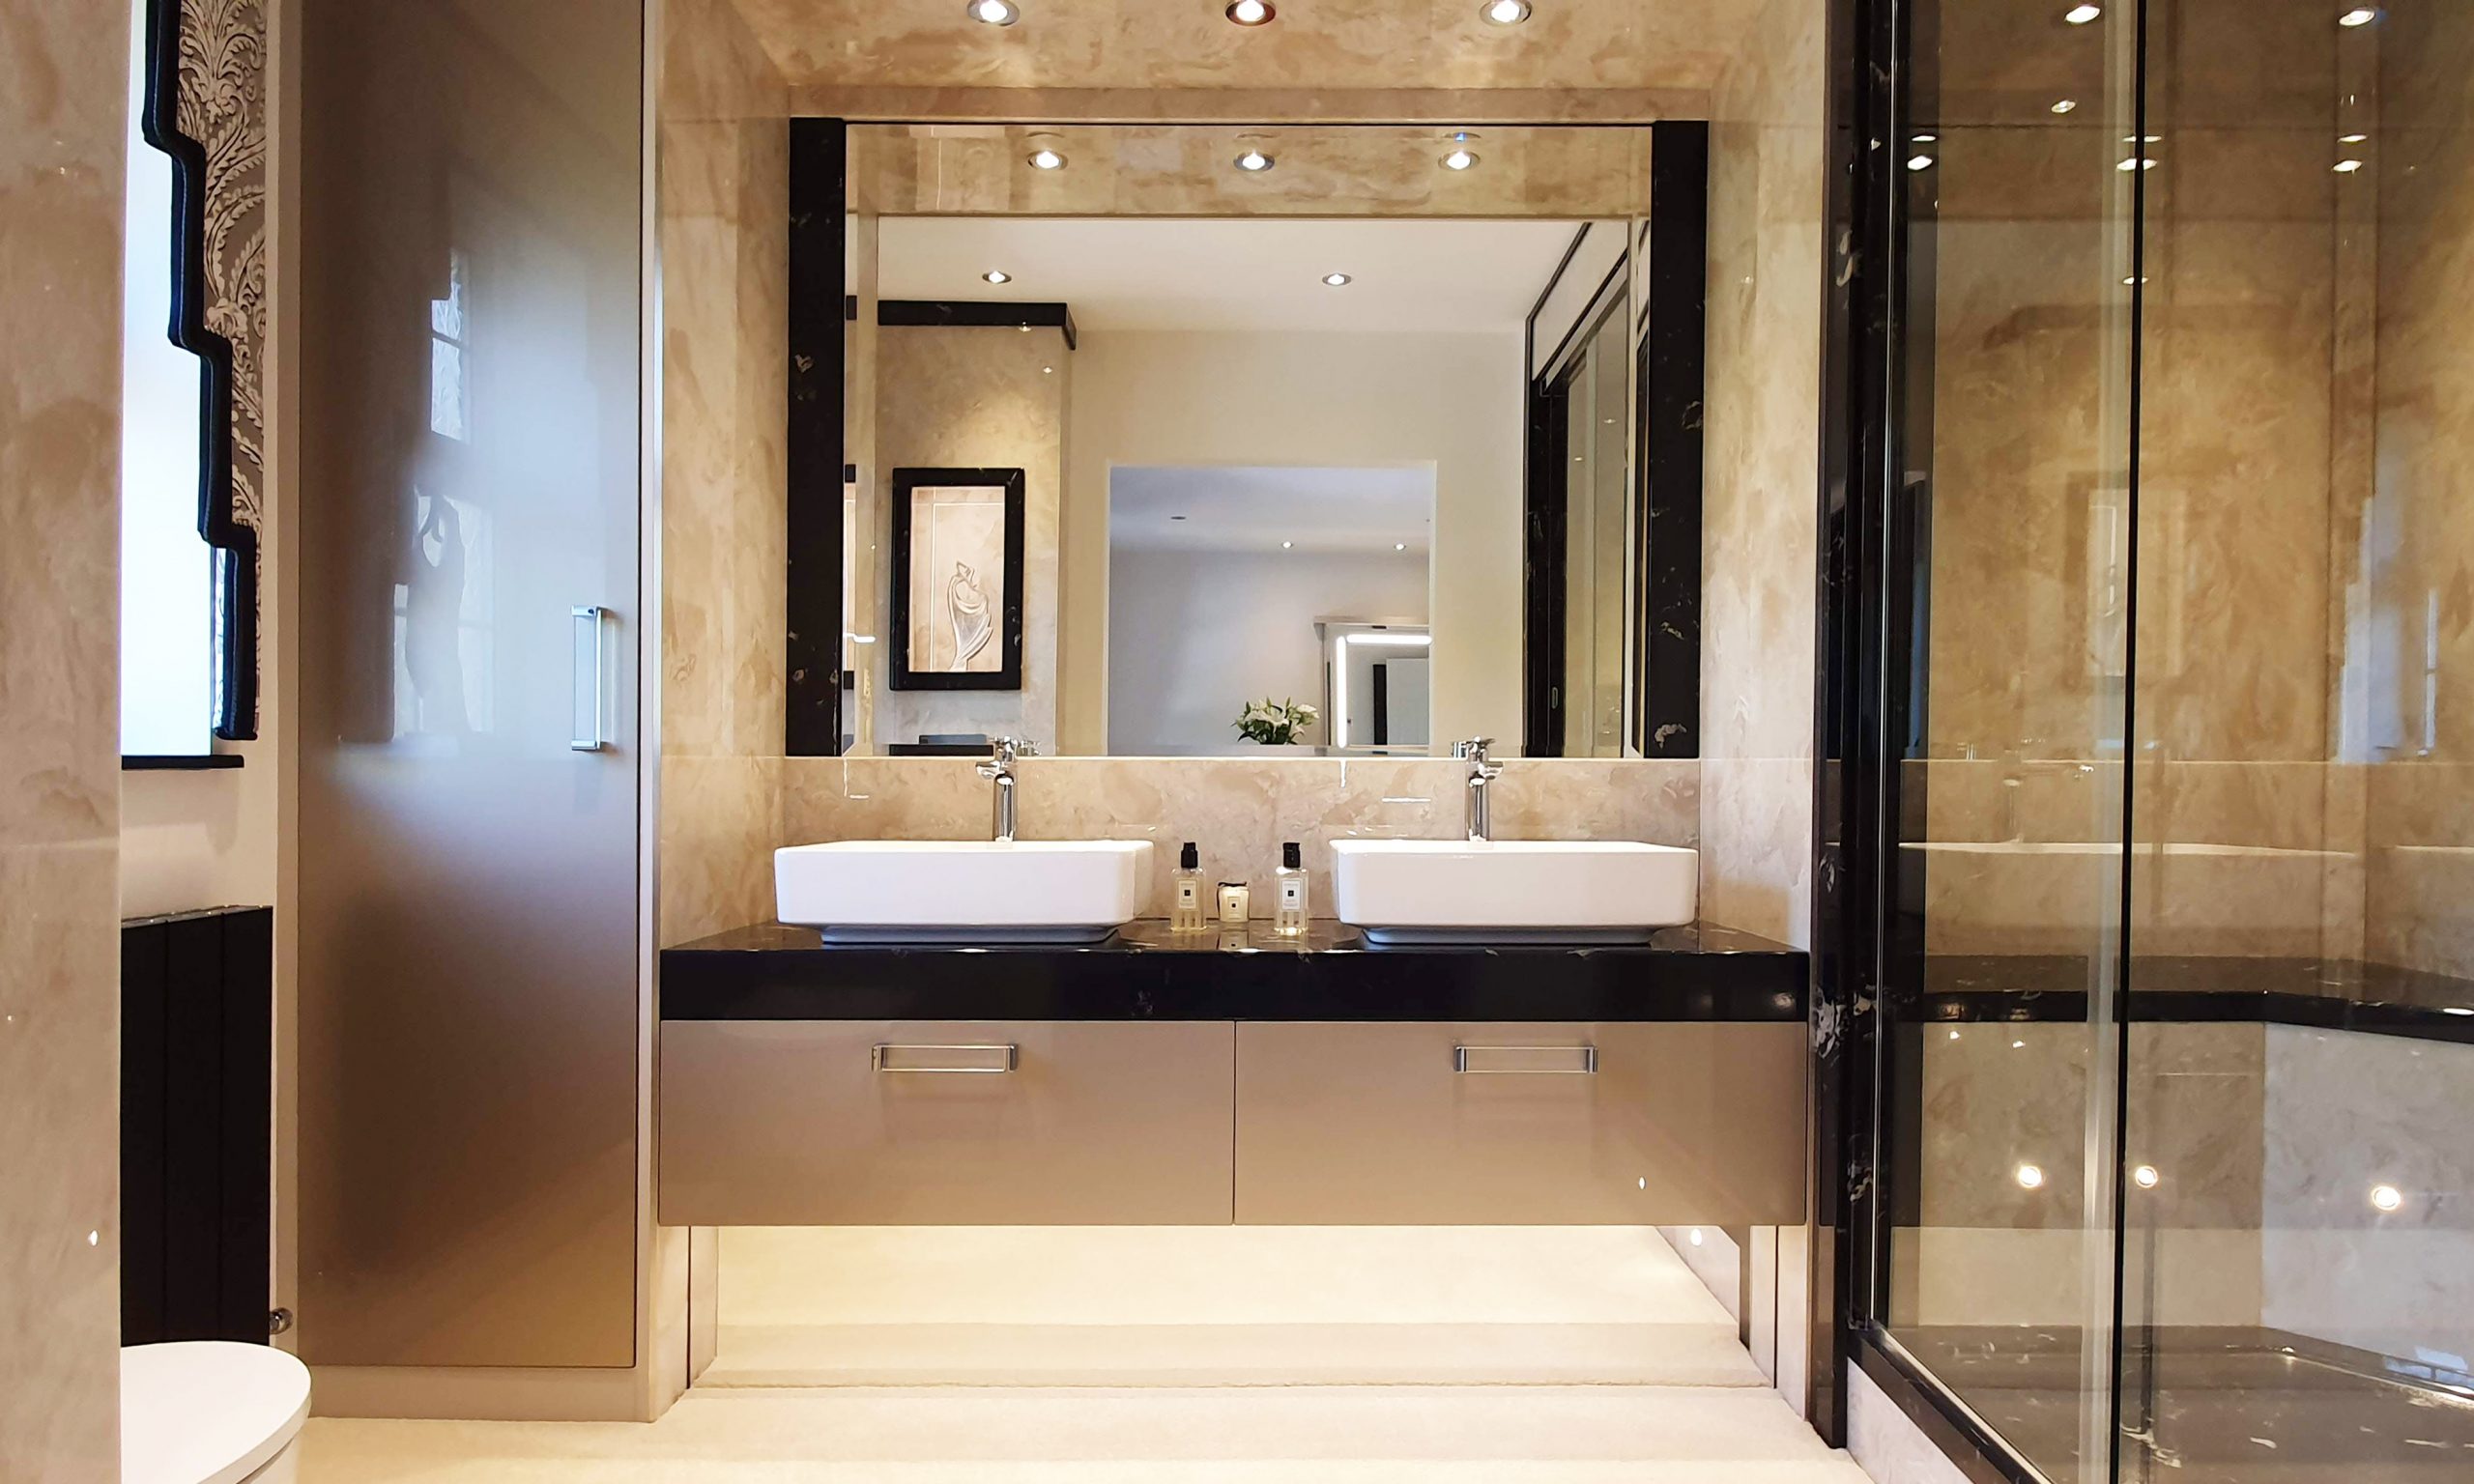 Twin bathroom with cream sparkle cabinets and top mounted basins